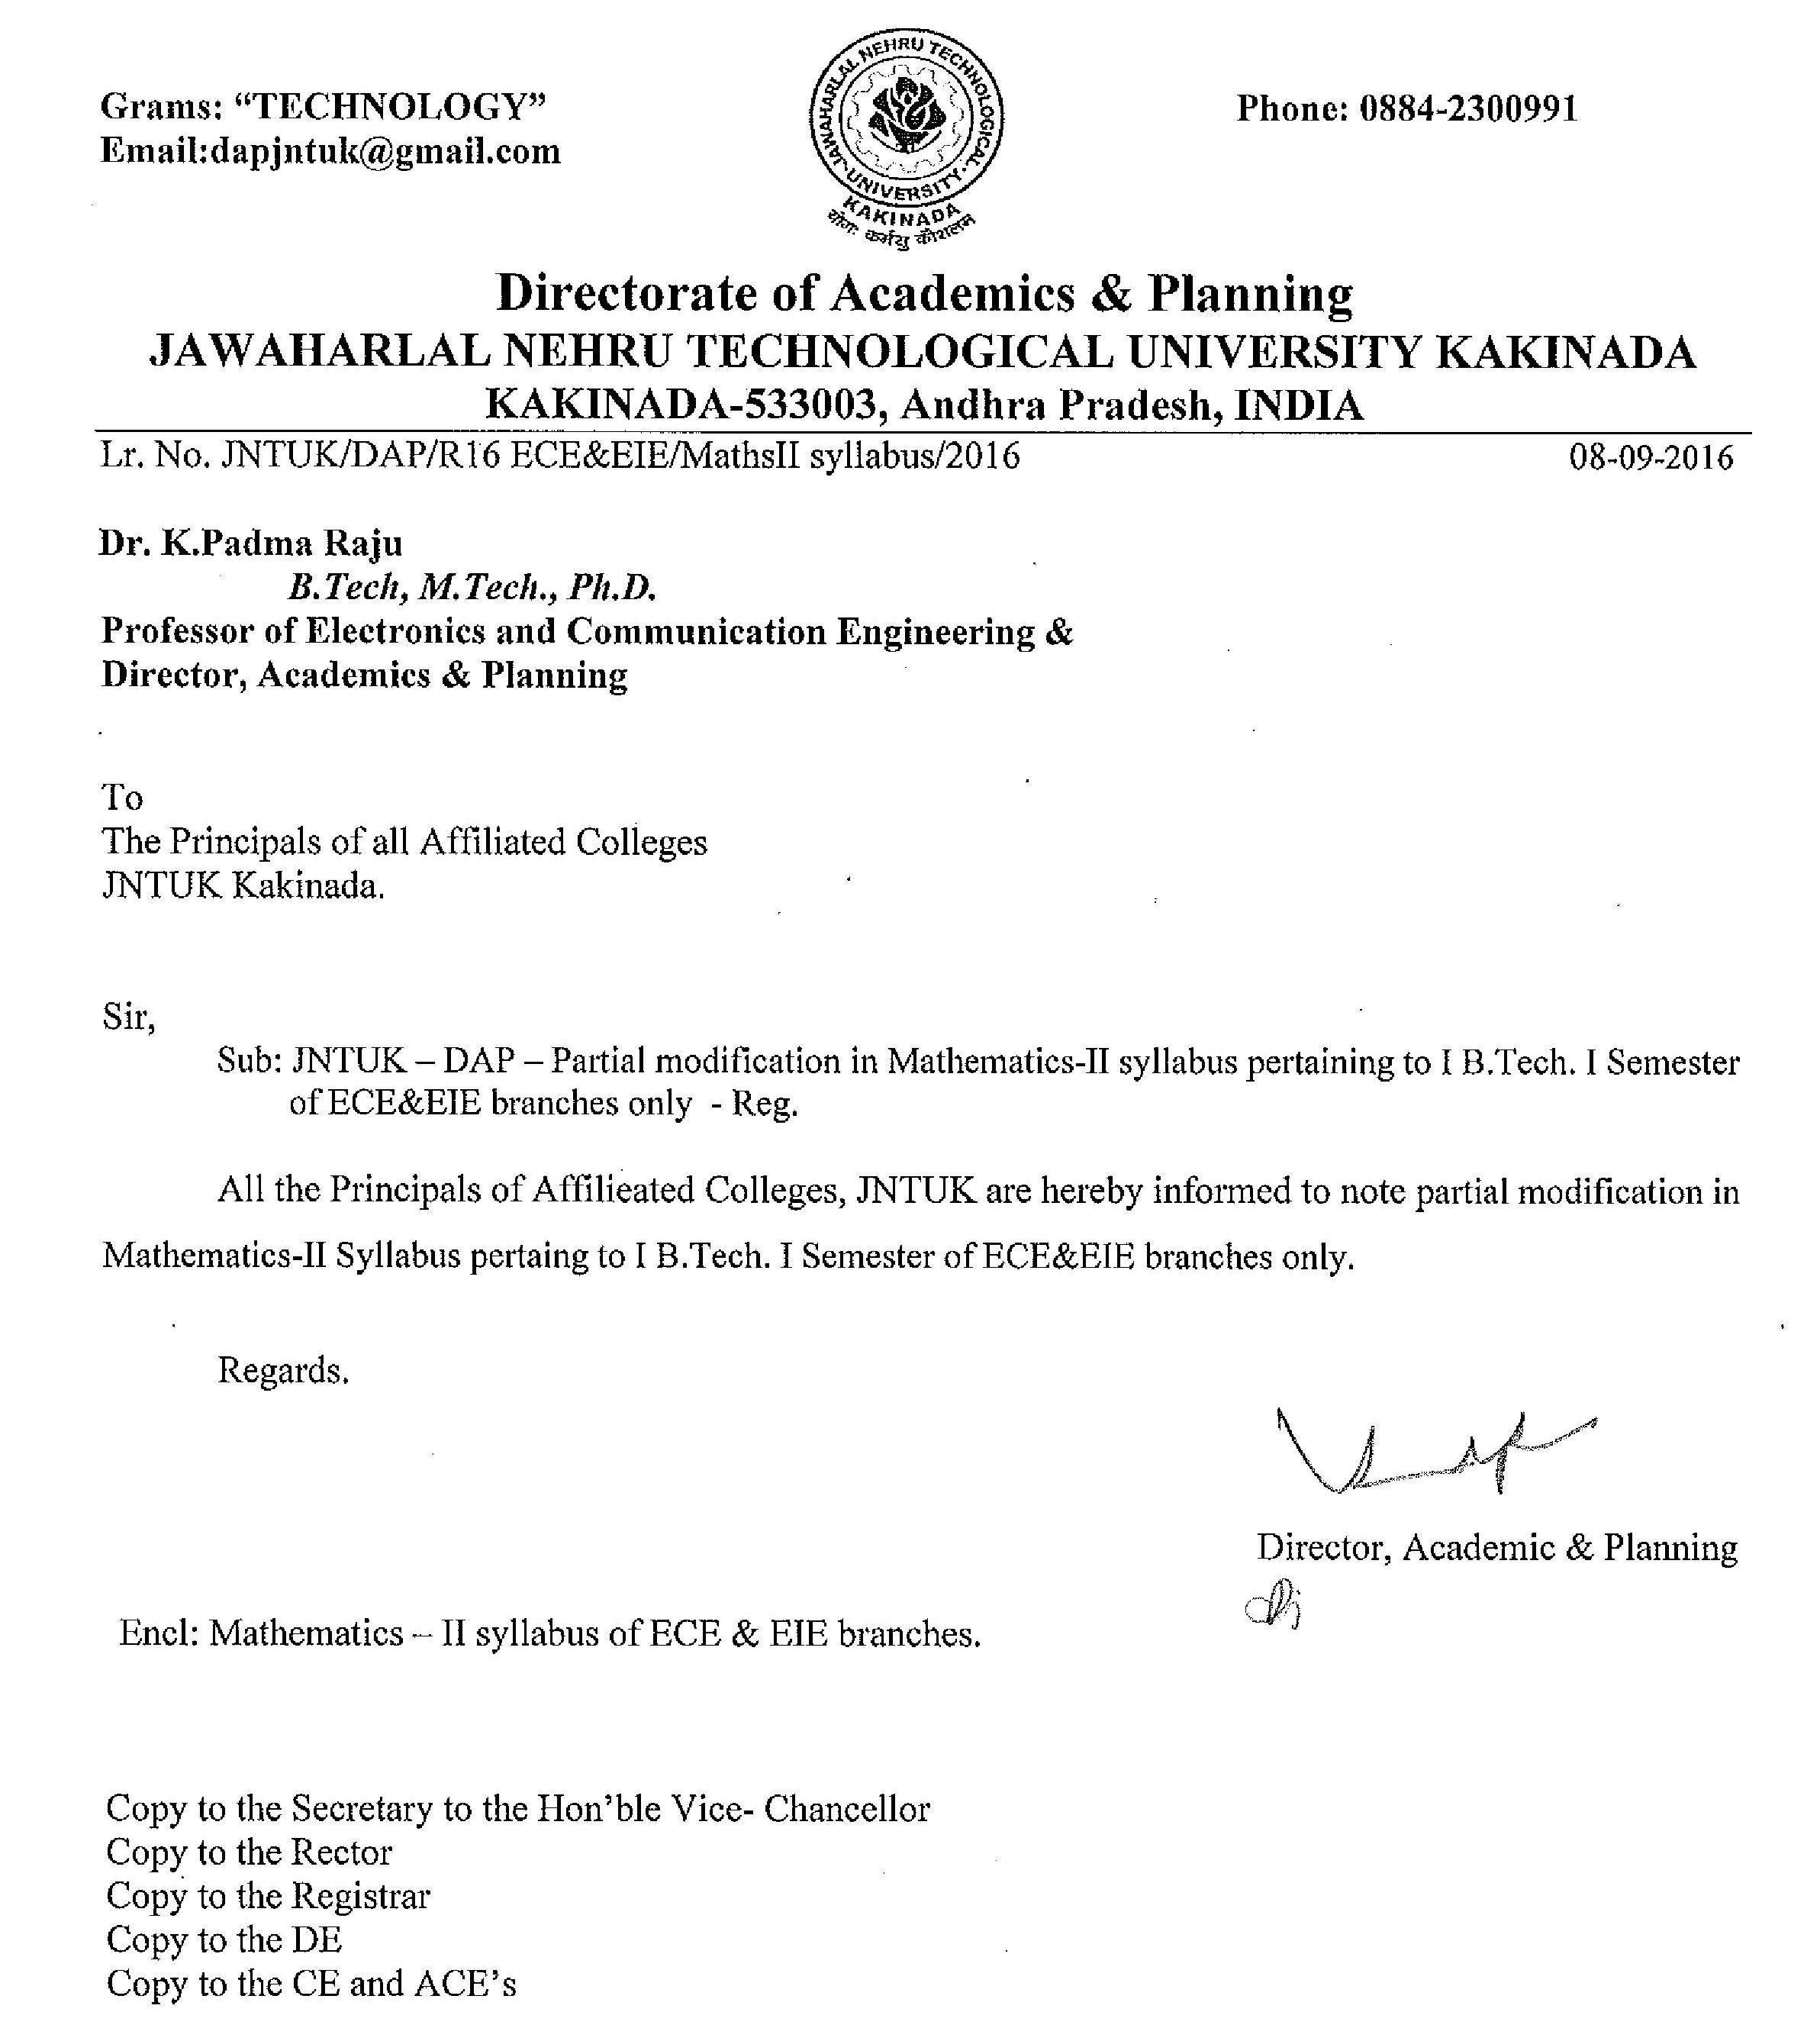 partial-modification-in-mathematics-ii-syllabus-pertaining-to-i-b-tech-i-semester-page1